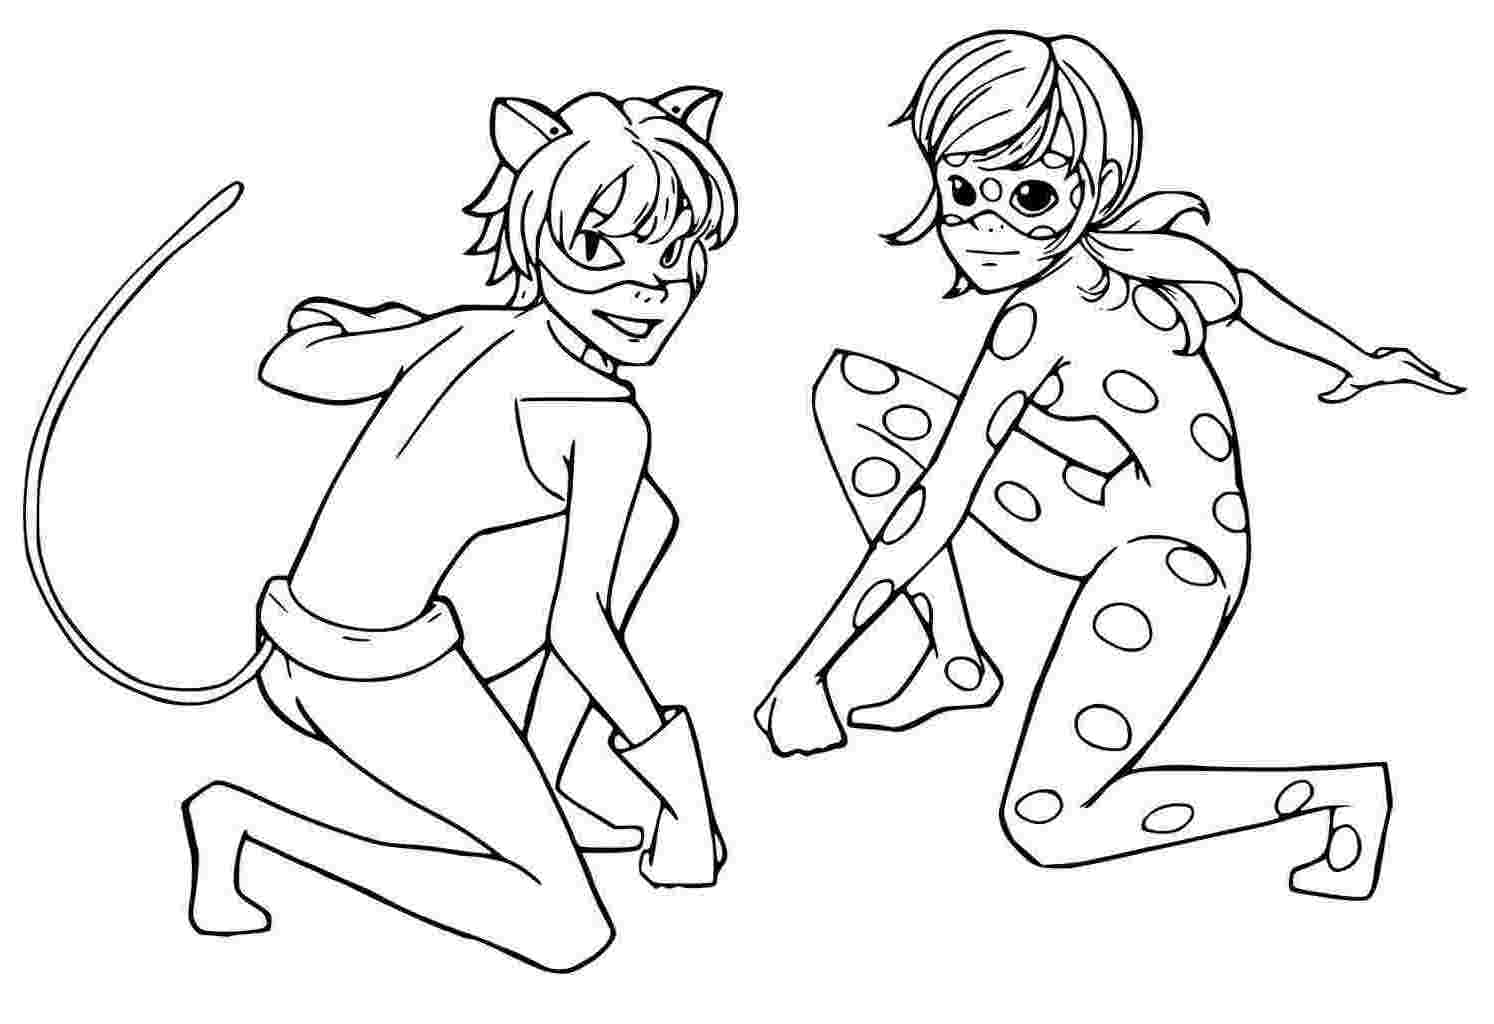 coloring pages ladybug miraculous coloring page miraculous ...